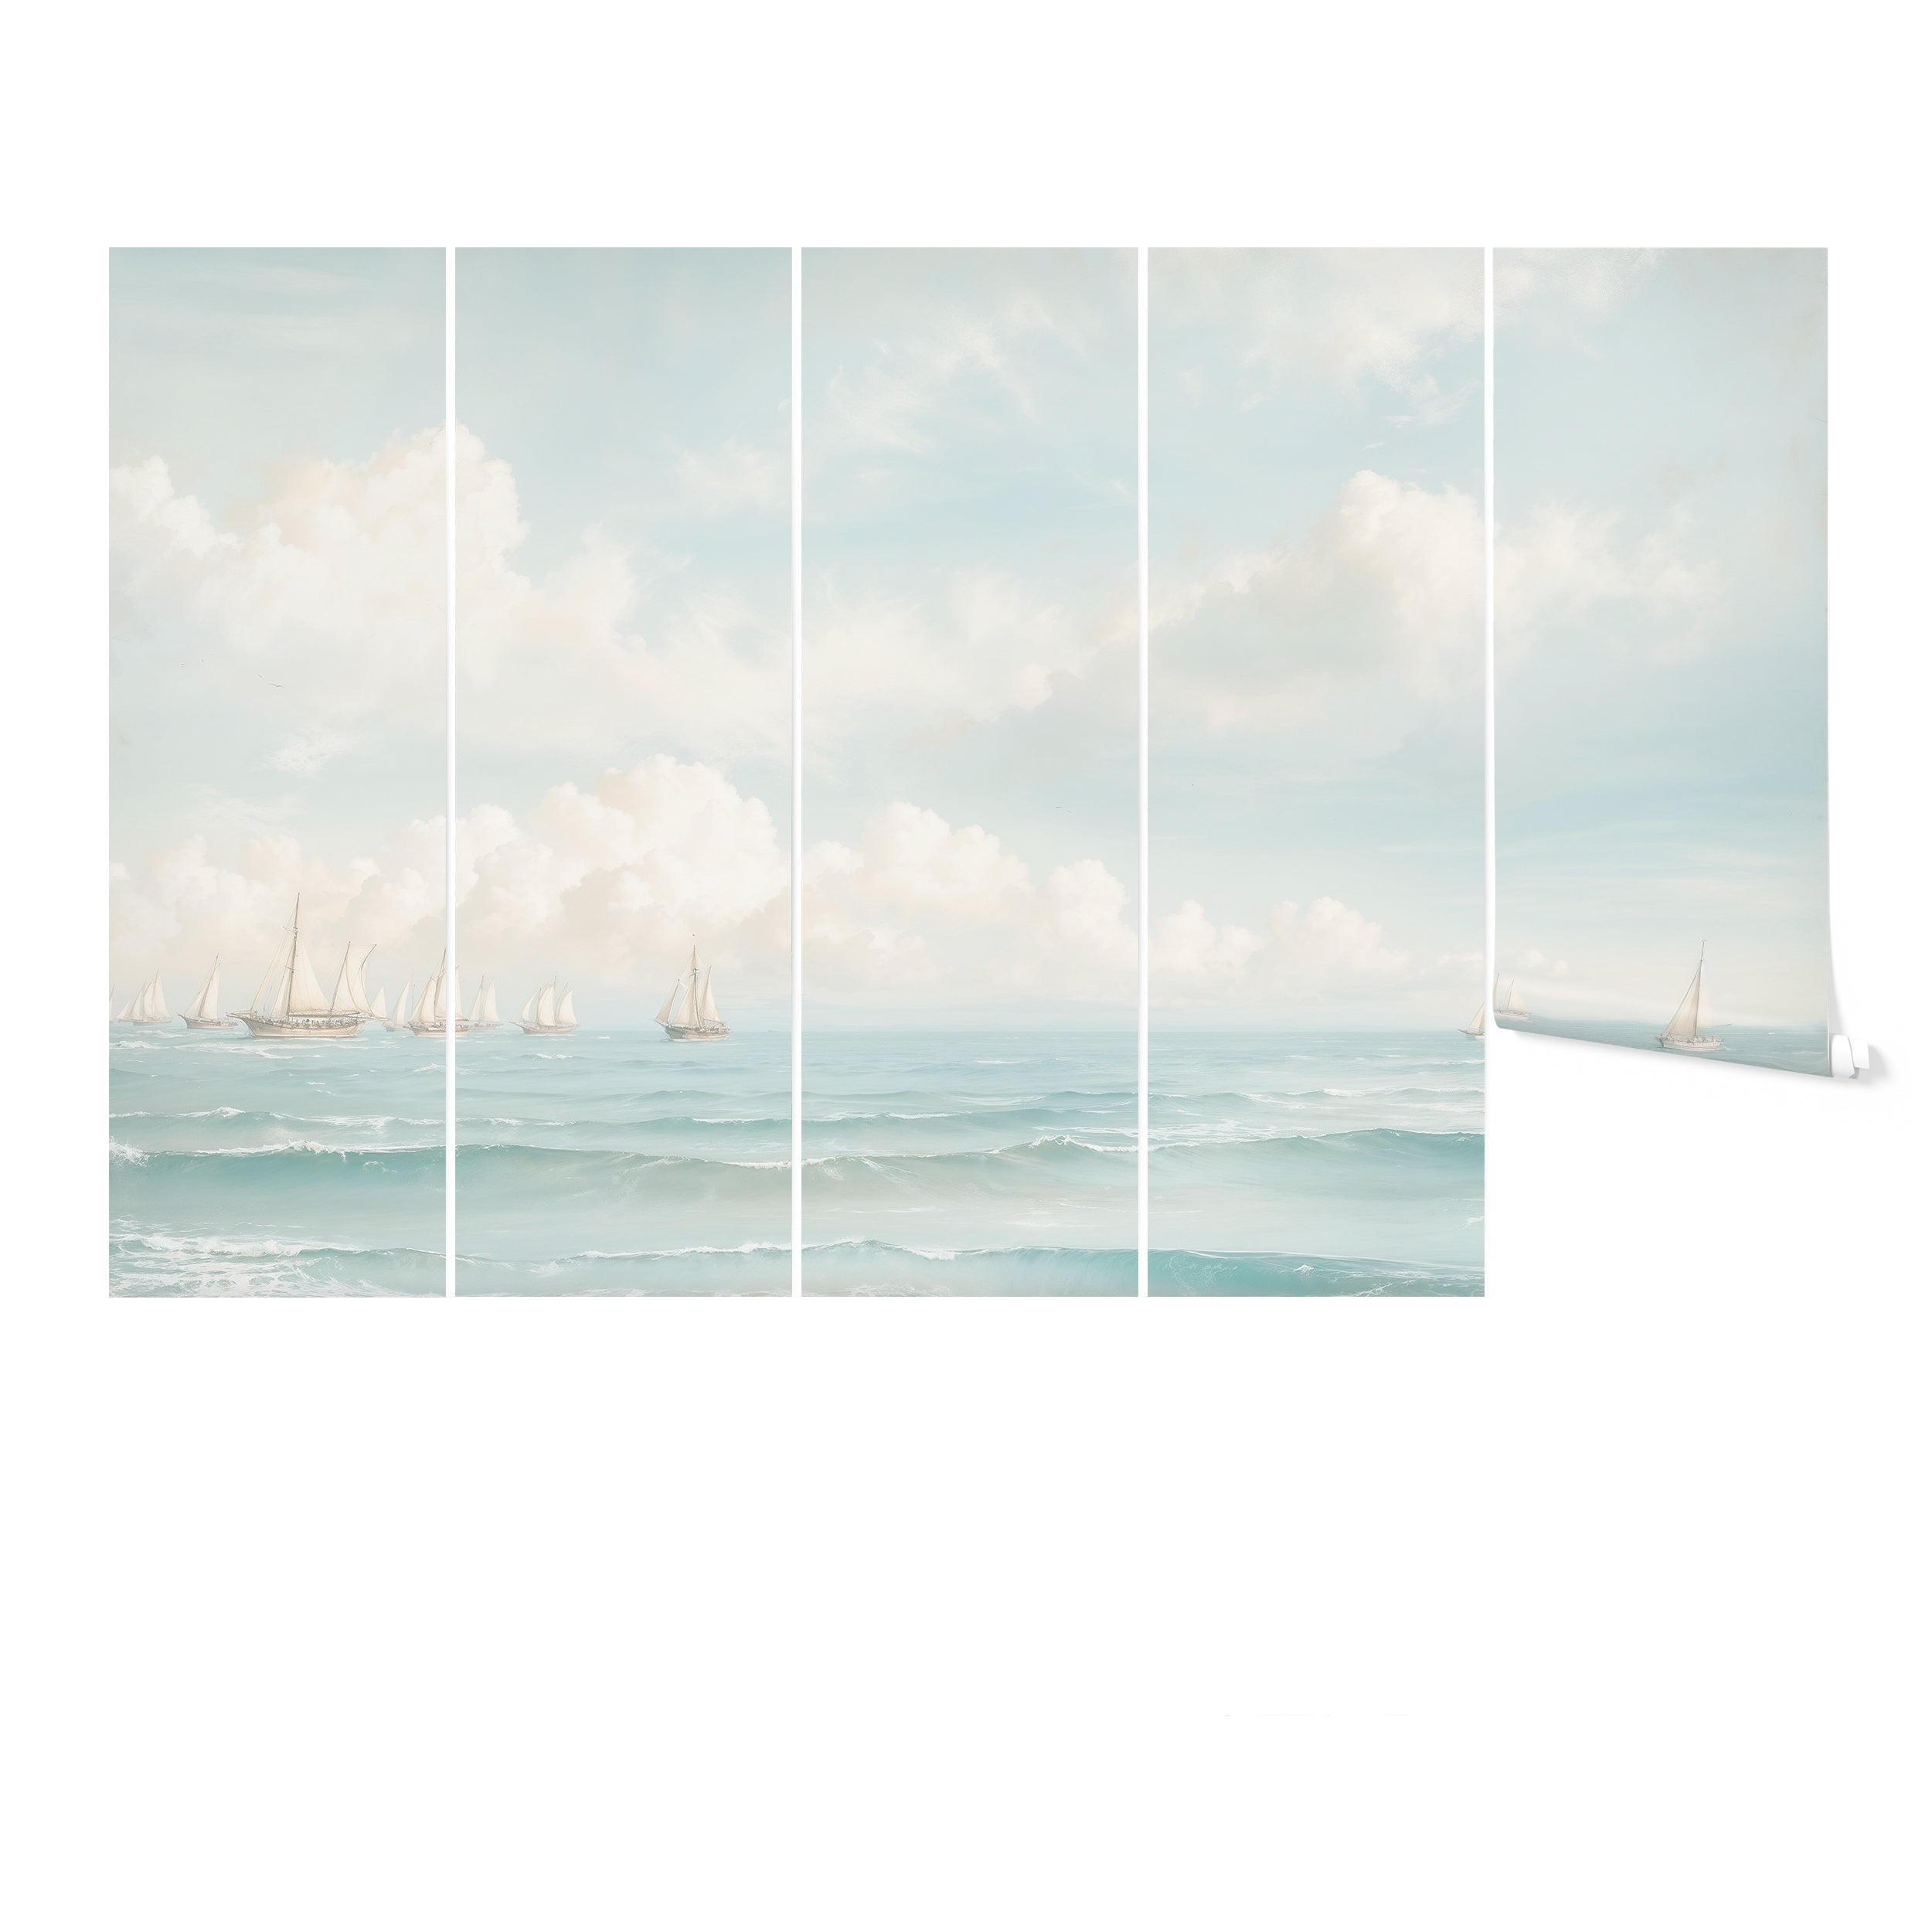 An artistic depiction of a seascape mural segmented into vertical panels, each featuring sailboats on a tranquil sea under a cloudy sky. The image also shows a rolled-up version of the mural, emphasizing its design flexibility.